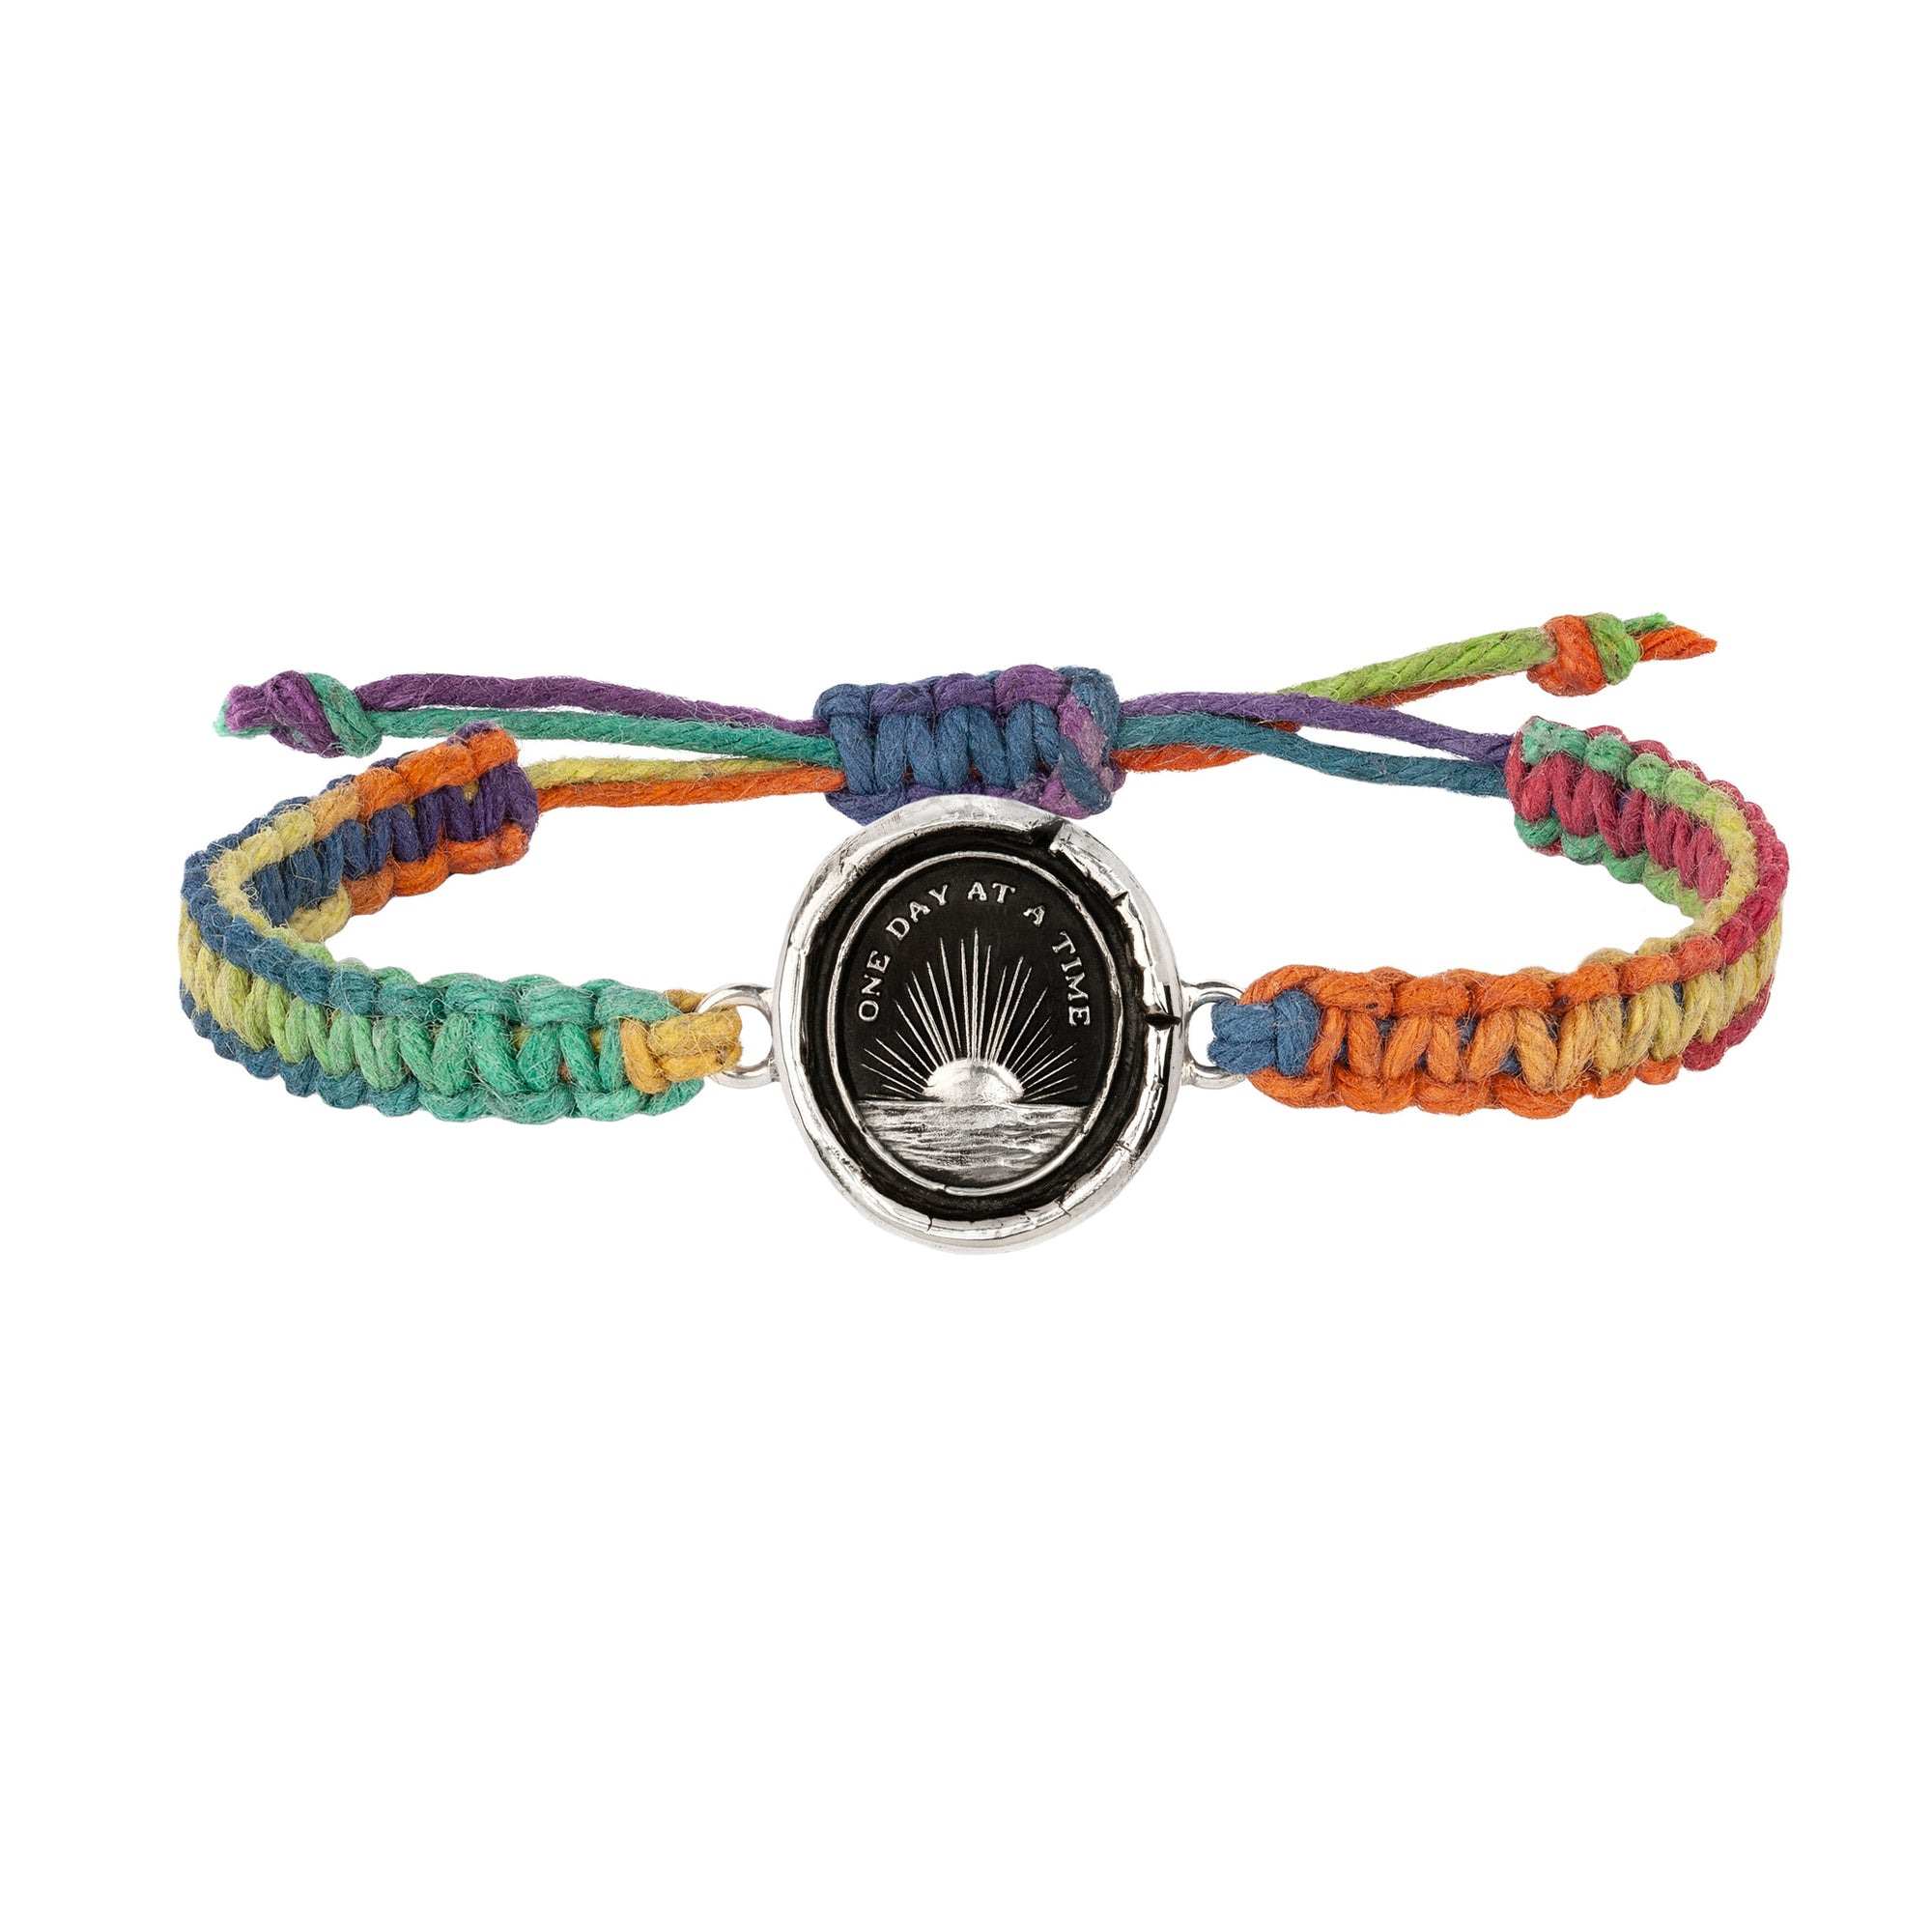 One Day at a Time Rainbow Braided Bracelet